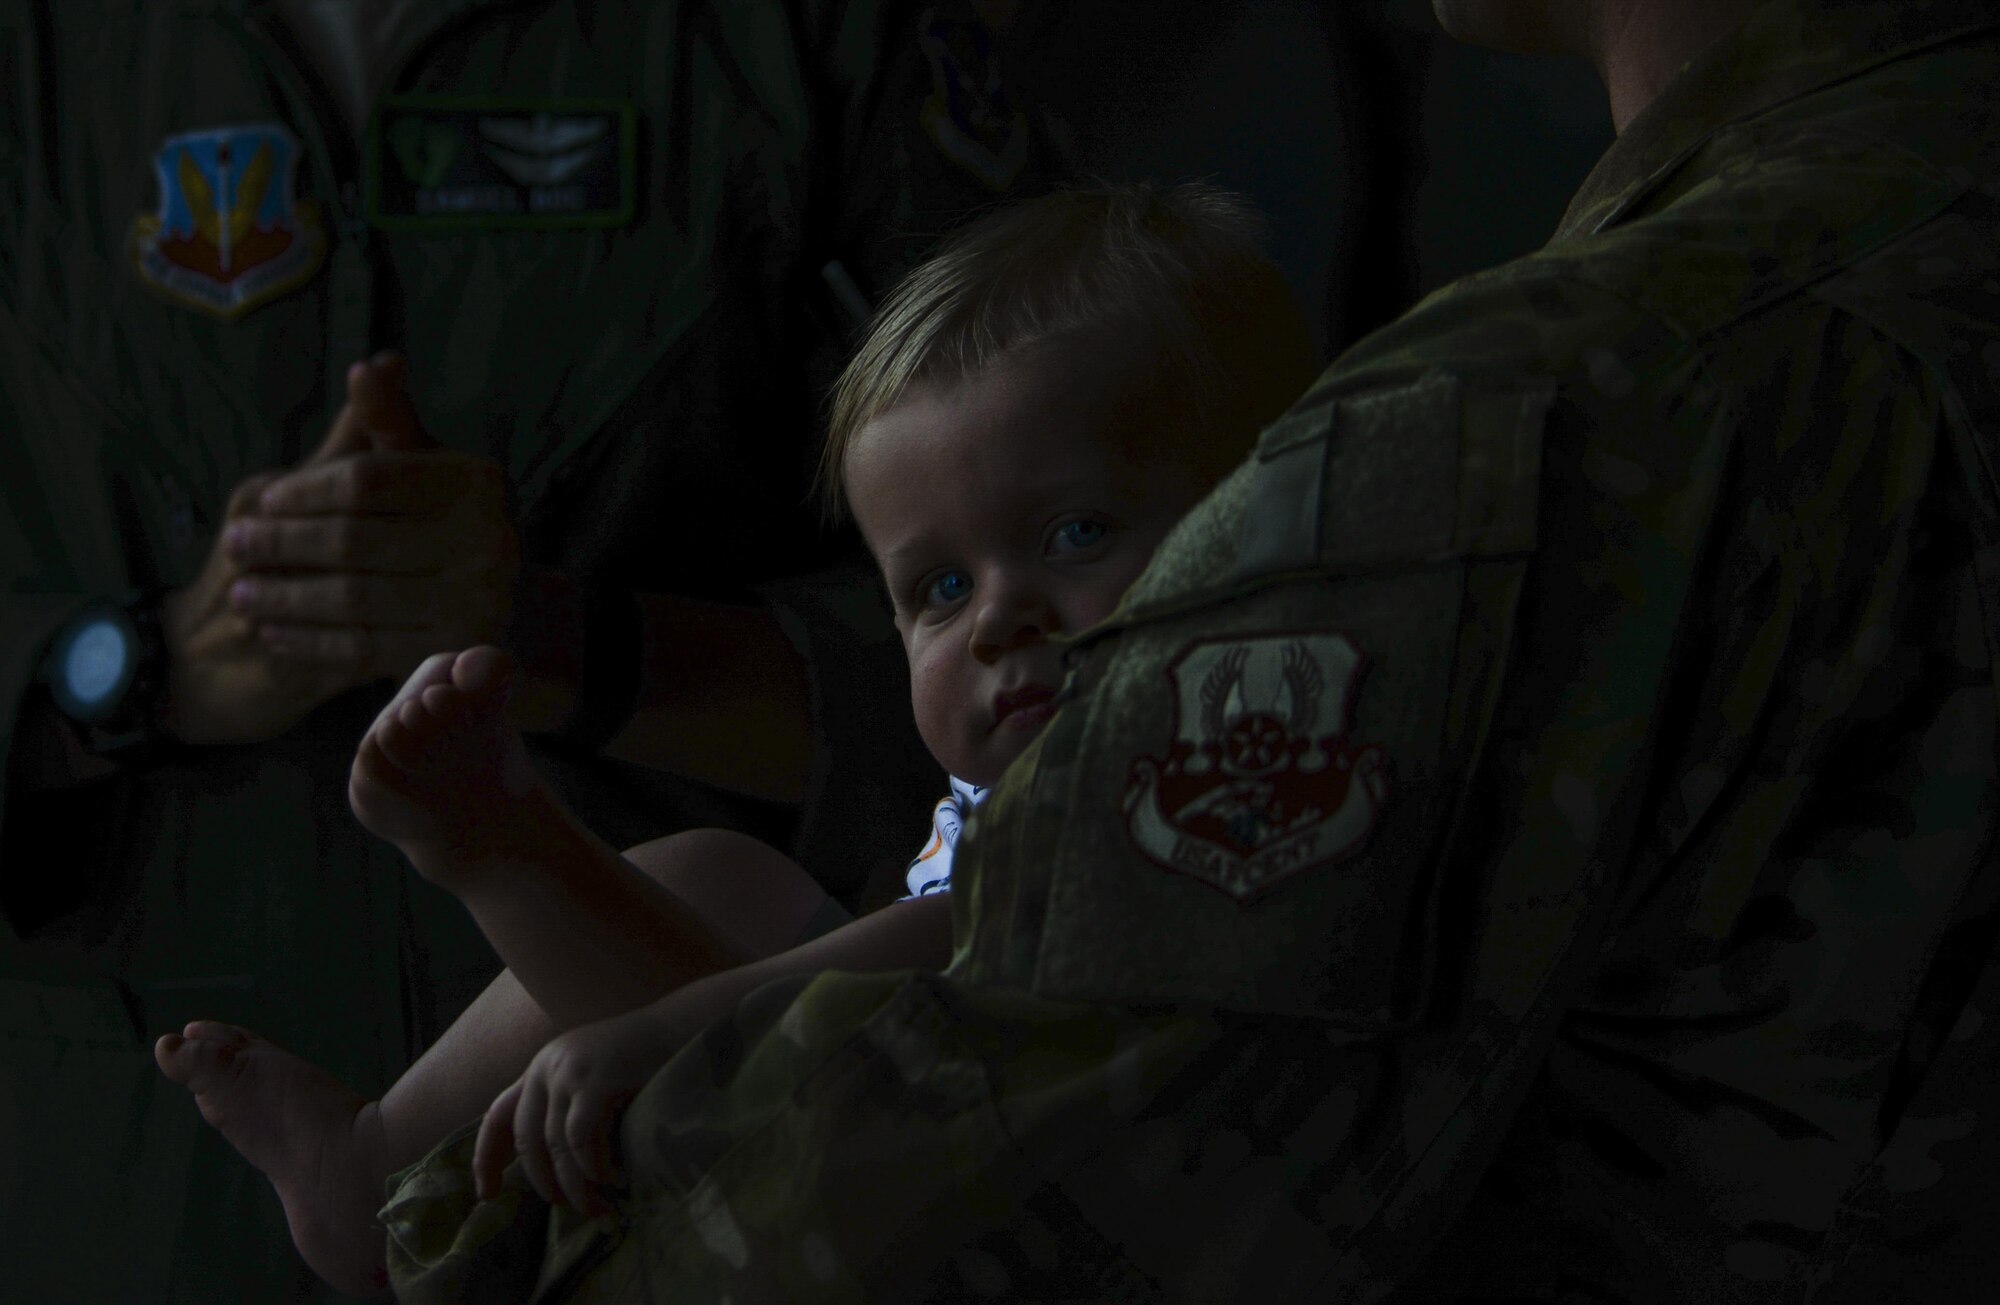 A child rests in the arms of an Airmen who just returned from a deployment to Afghanistan at Nellis Air Force Base, Nev., June 7. Approximately 80 Airmen from the 66th Rescue Squadron and 823rd Maintenance Squadron were welcomed
home June 3 and 7 after being deployed for approximately four months. (U.S. Air Force photo by Airman 1st Class Kevin Tanenbaum)